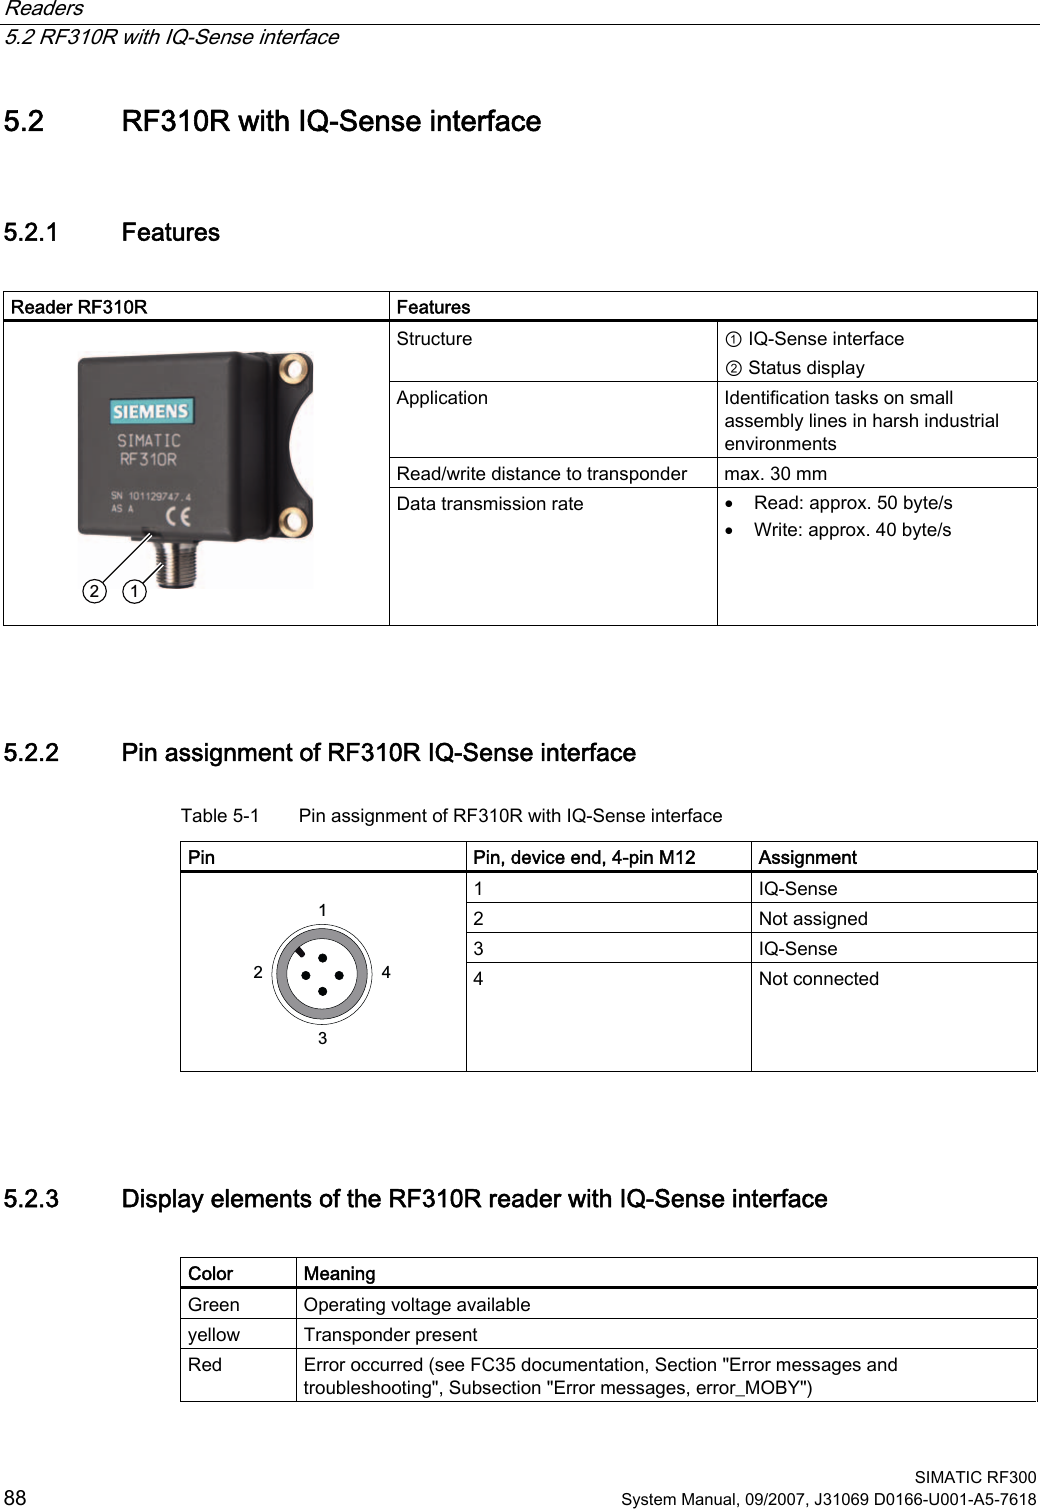 Readers   5.2 RF310R with IQ-Sense interface  SIMATIC RF300 88 System Manual, 09/2007, J31069 D0166-U001-A5-7618 5.2 RF310R with IQ-Sense interface 5.2.1 Features  Reader RF310R  Features Structure  ① IQ-Sense interface ② Status display Application  Identification tasks on small assembly lines in harsh industrial environments Read/write distance to transponder  max. 30 mm    Data transmission rate  • Read: approx. 50 byte/s • Write: approx. 40 byte/s  5.2.2 Pin assignment of RF310R IQ-Sense interface Table 5-1  Pin assignment of RF310R with IQ-Sense interface Pin  Pin, device end, 4-pin M12  Assignment 1  IQ-Sense 2  Not assigned 3  IQ-Sense    4  Not connected  5.2.3 Display elements of the RF310R reader with IQ-Sense interface  Color  Meaning Green  Operating voltage available yellow  Transponder present Red  Error occurred (see FC35 documentation, Section &quot;Error messages and troubleshooting&quot;, Subsection &quot;Error messages, error_MOBY&quot;) 